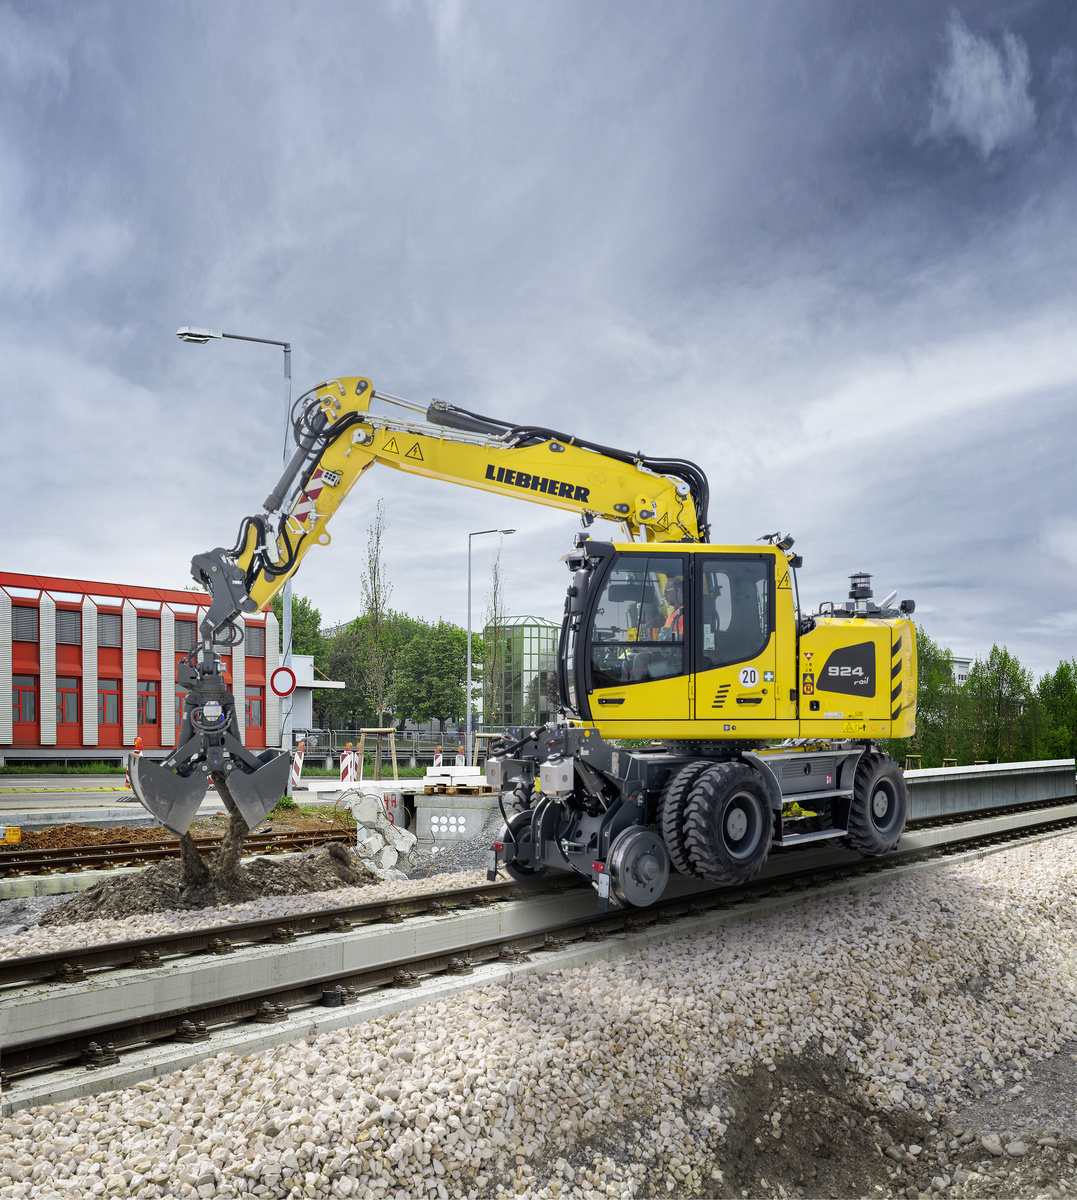 At the 28th International Exhibition for Track Technology in Münster Liebherr presents a representative of its successful rail-road excavator with the A 924 Rail Litronic.